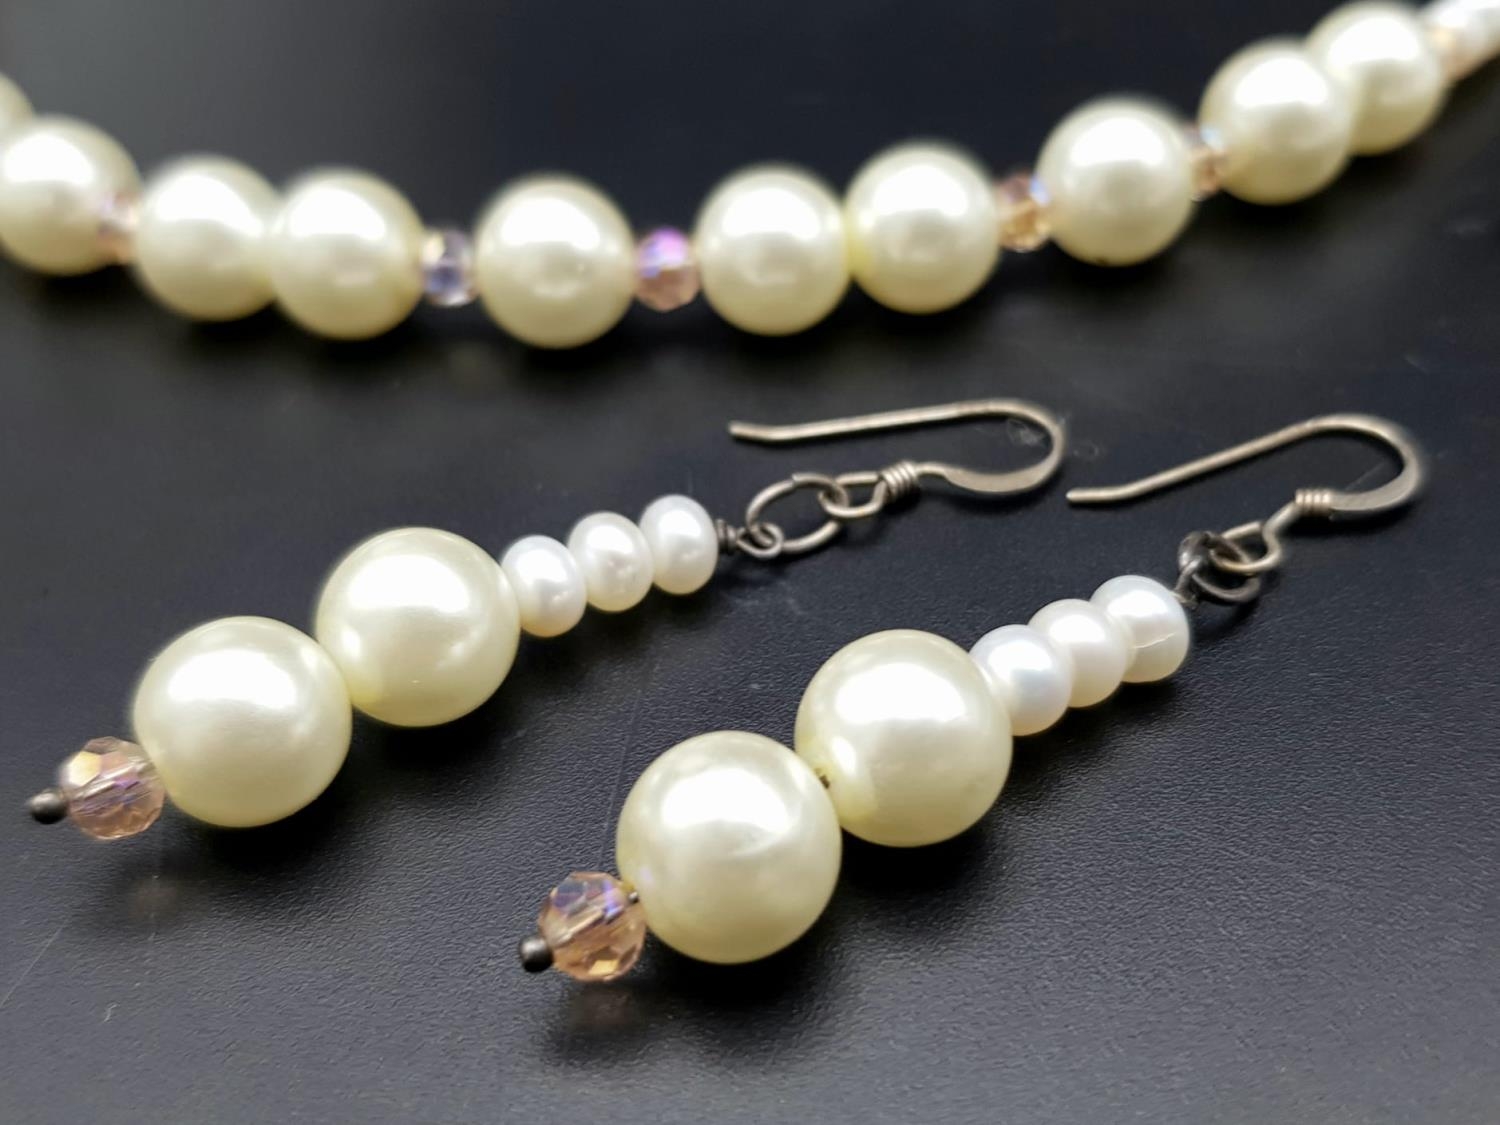 A Vintage Classic Rosita Faux Pearl Jewellery Set. Two necklace and a pair of drop earrings in the - Image 2 of 6